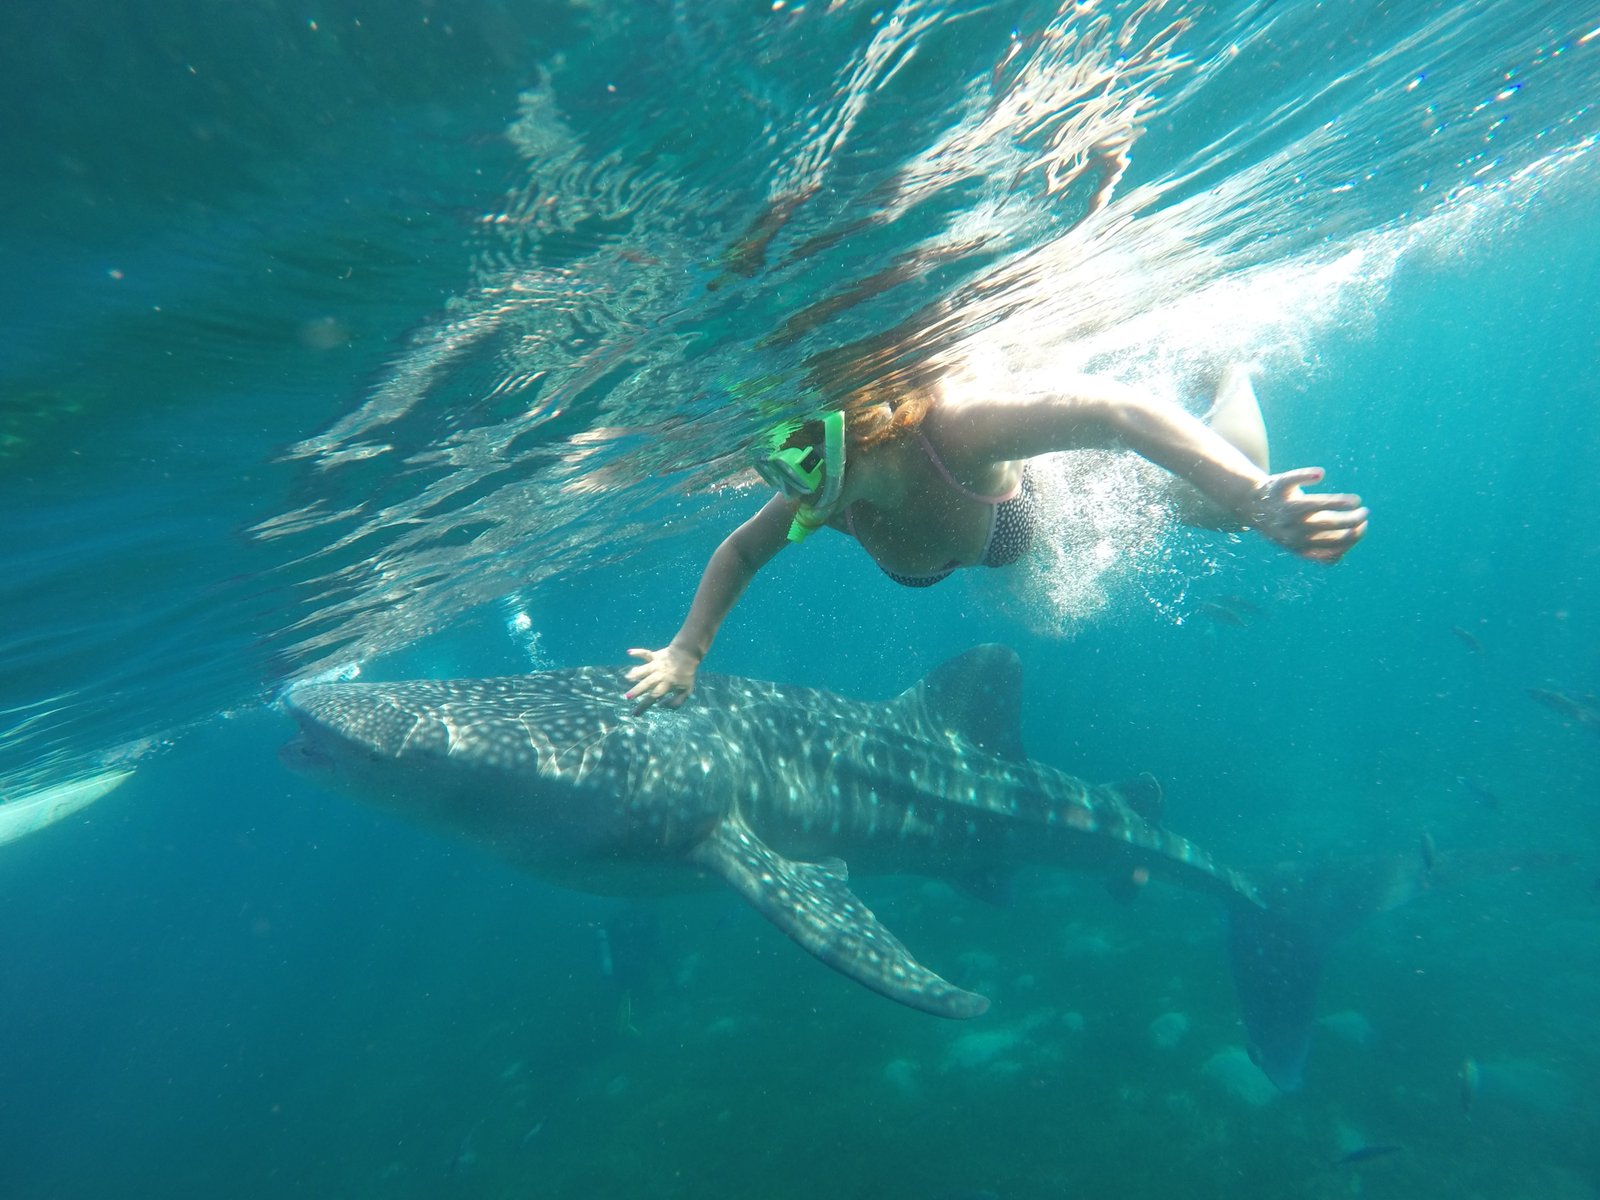 Swimming with Whale Sharks in Cebu, Philippines